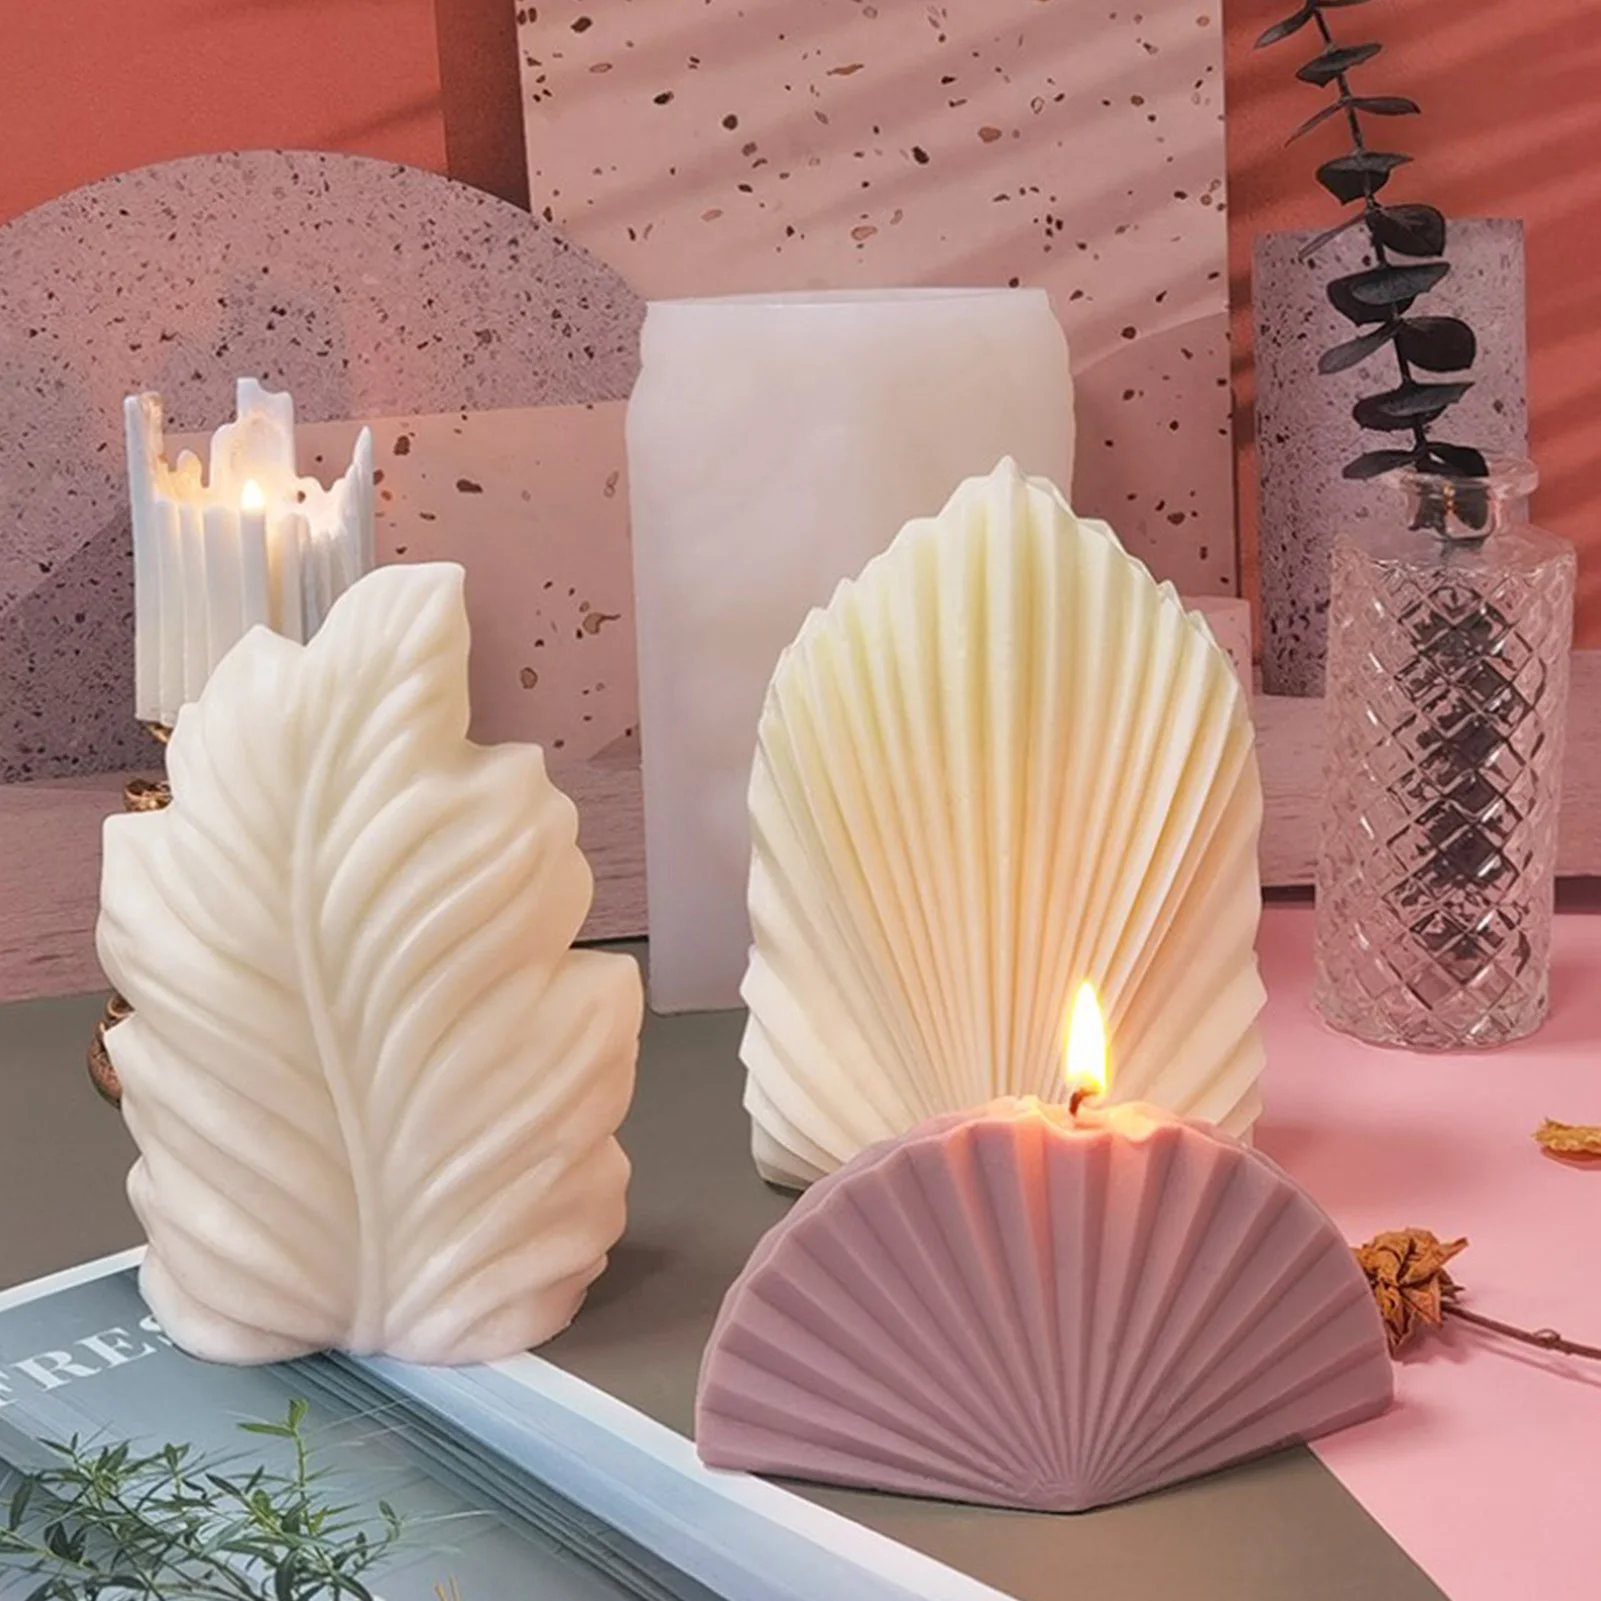 

Large Art Coral Shell Candle Silicone Mold Handmade 3D Aromatherapy Craft Scented Candle Soy Wax Mold Home Decor Resin Mould